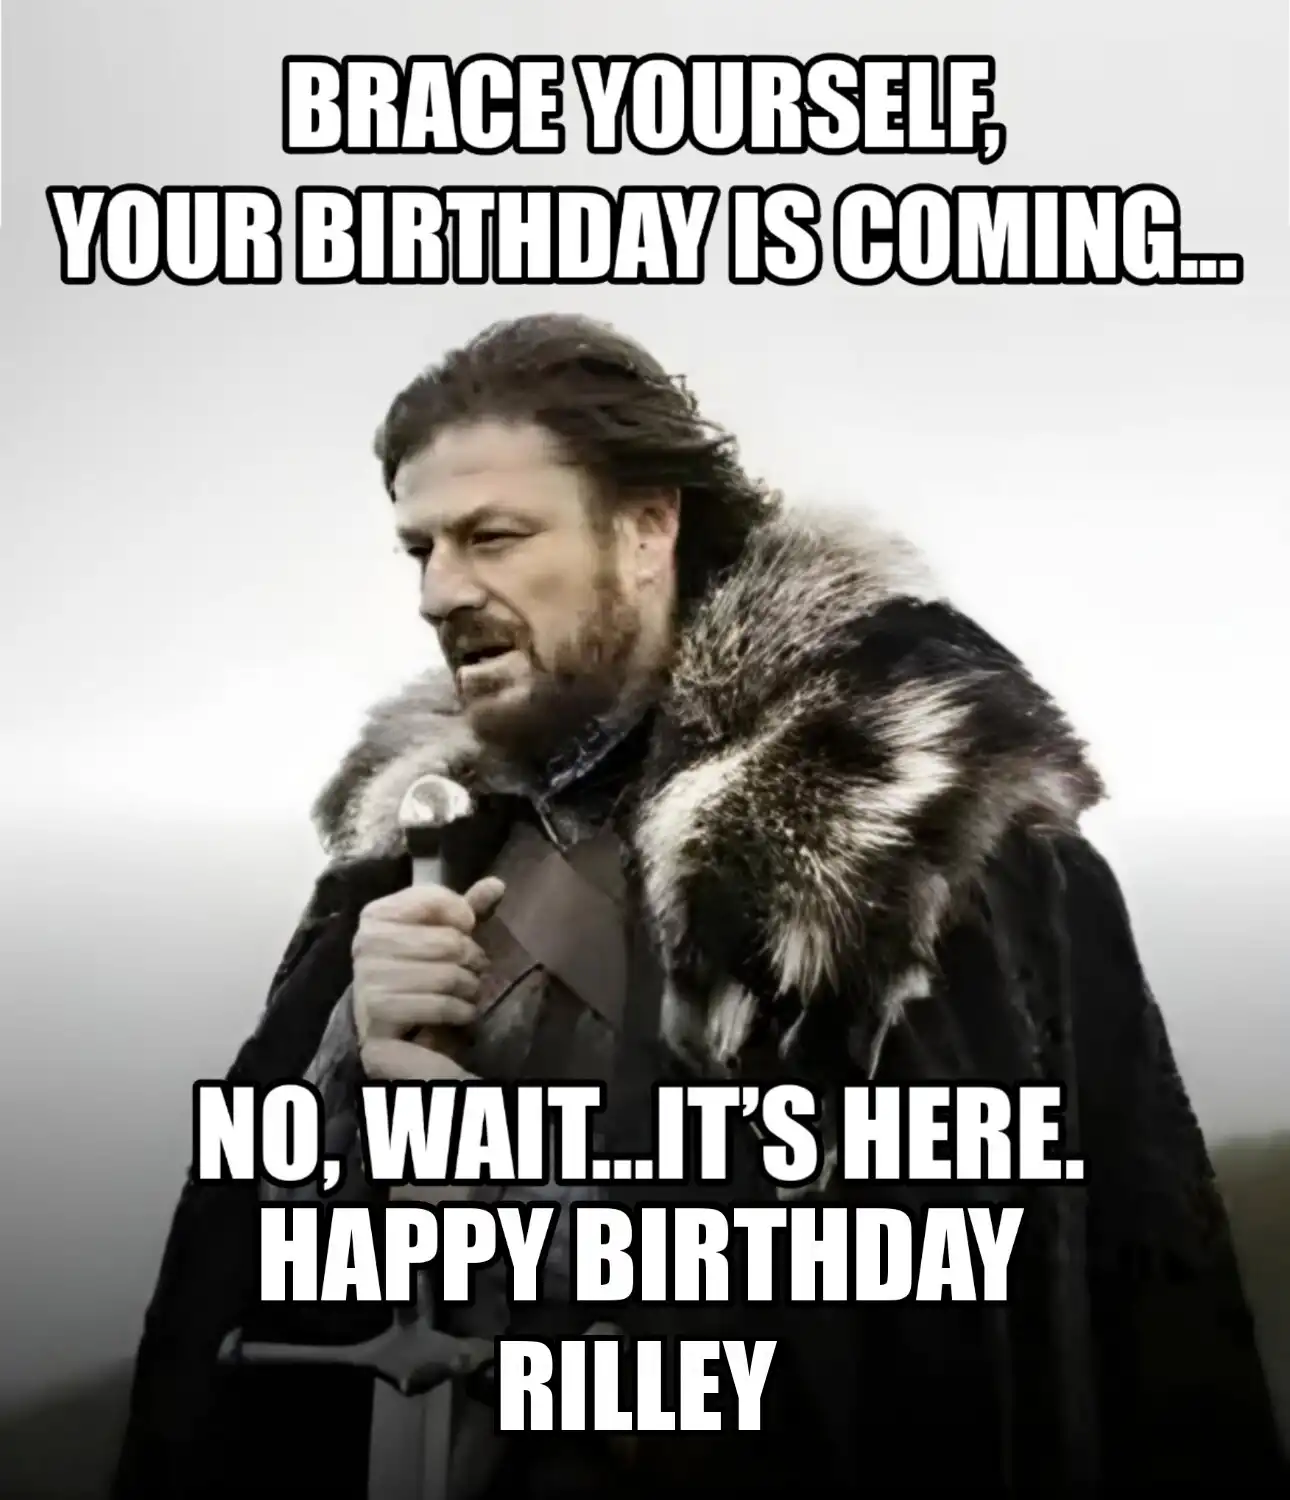 Happy Birthday Rilley Brace Yourself Your Birthday Is Coming Meme